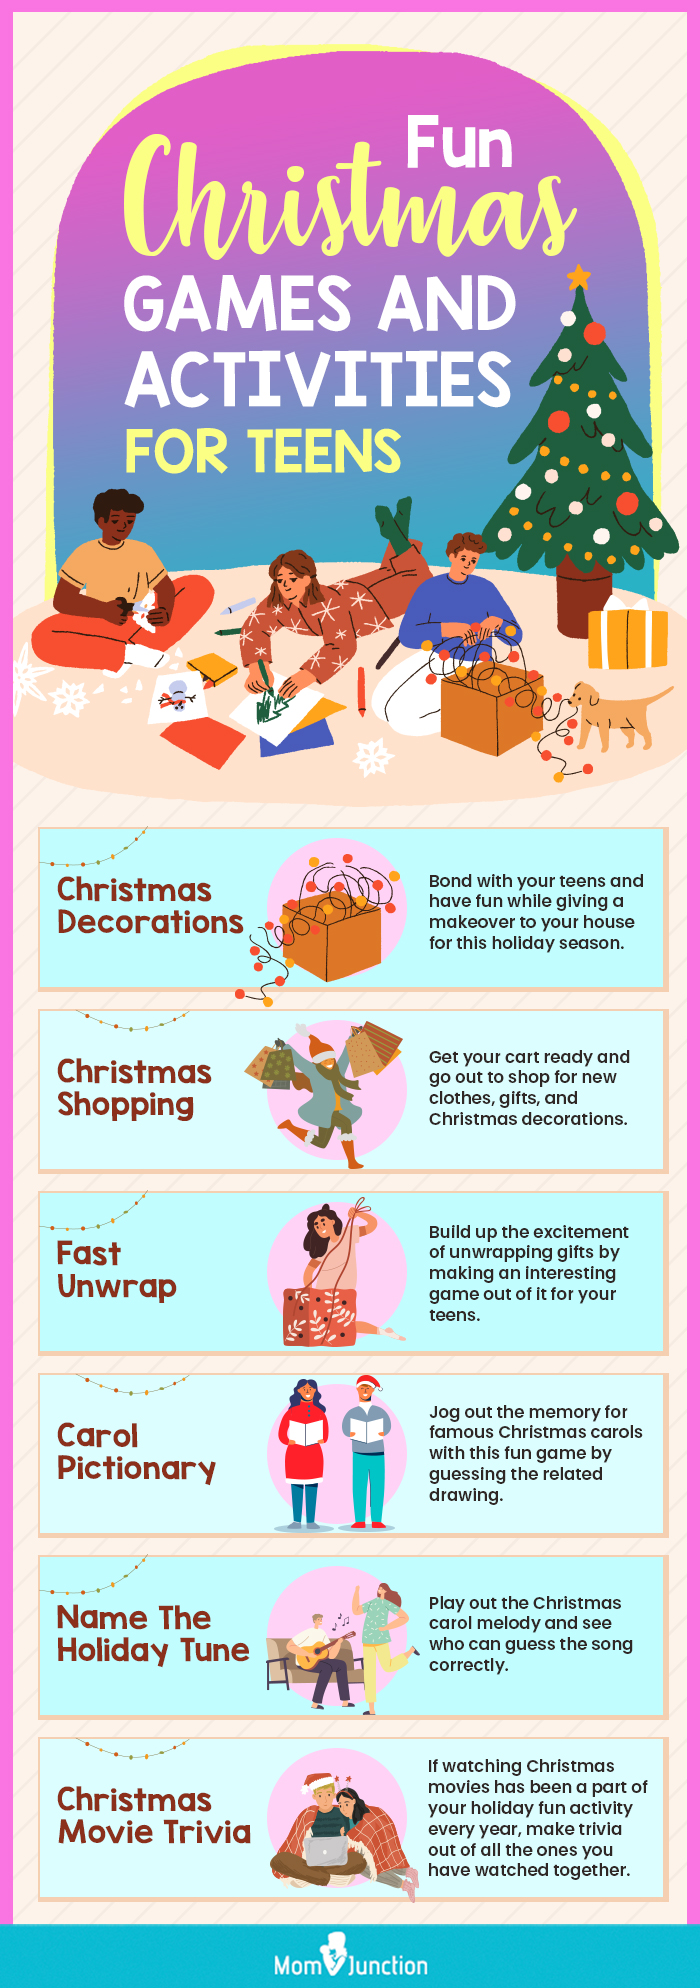 fun christmas games and activities for teens (infographic)